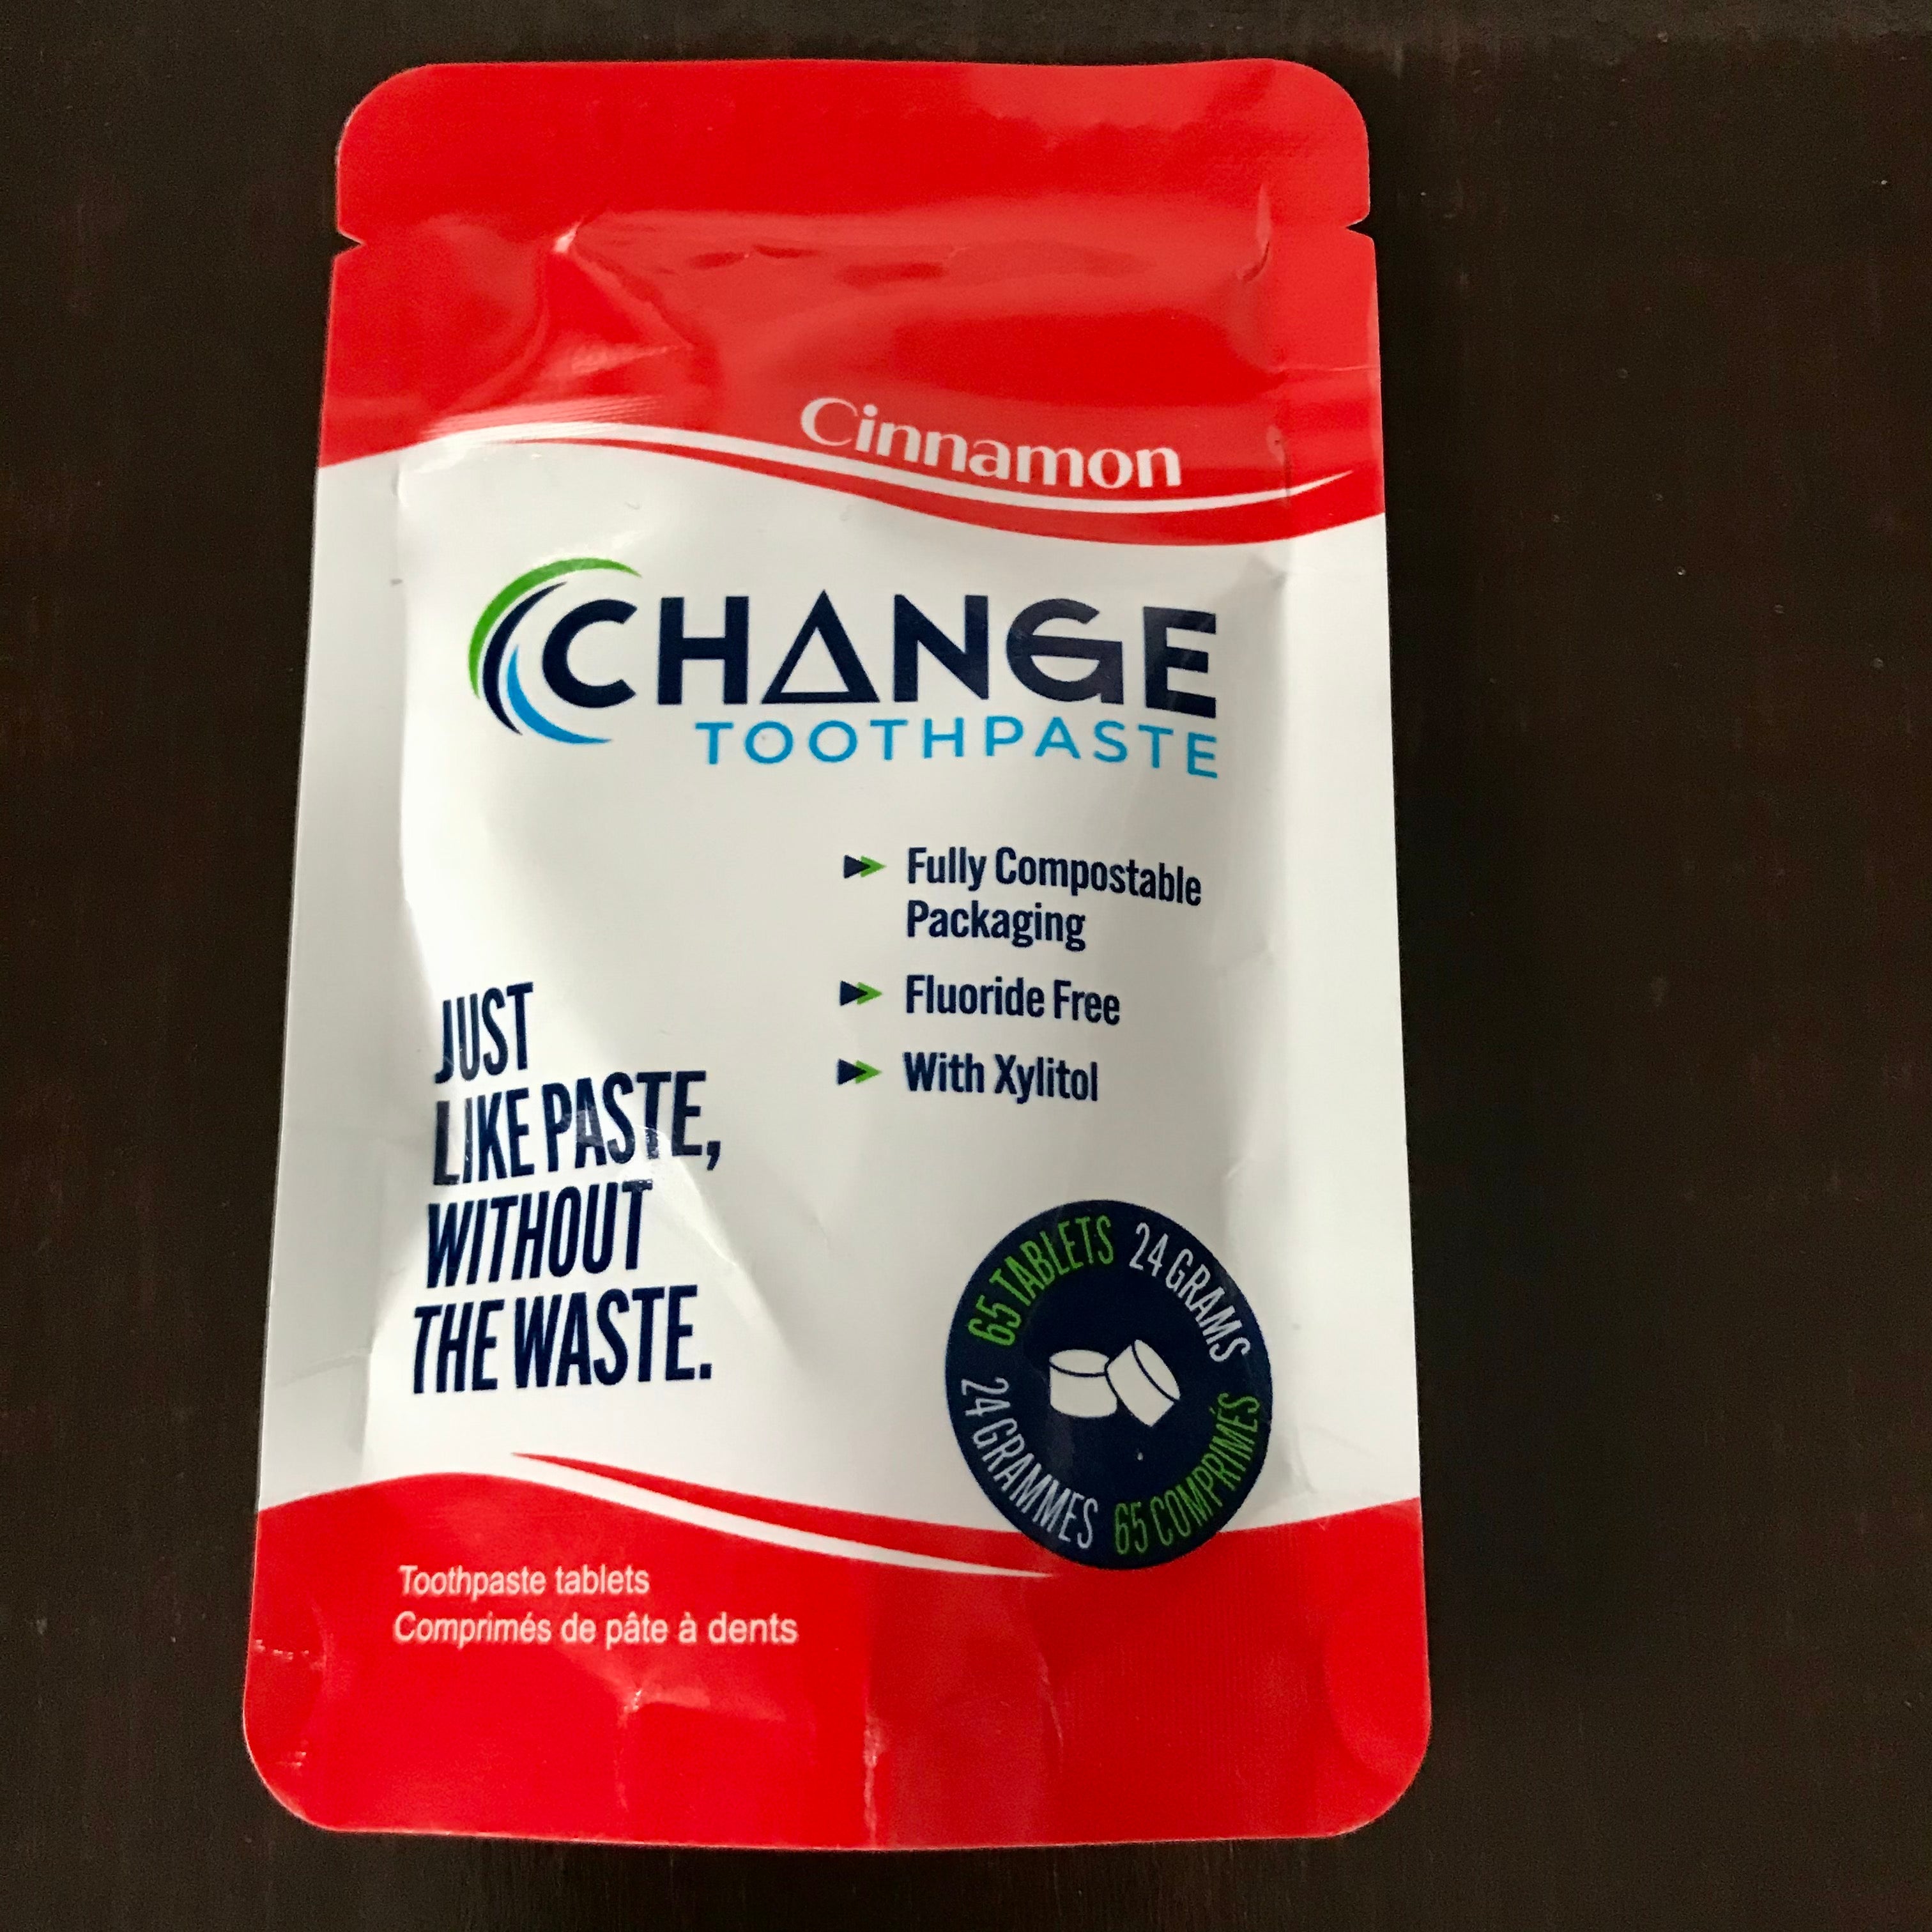 cinnamon change toothpaste tablets 65 1 month supply compostable packaging made in canada